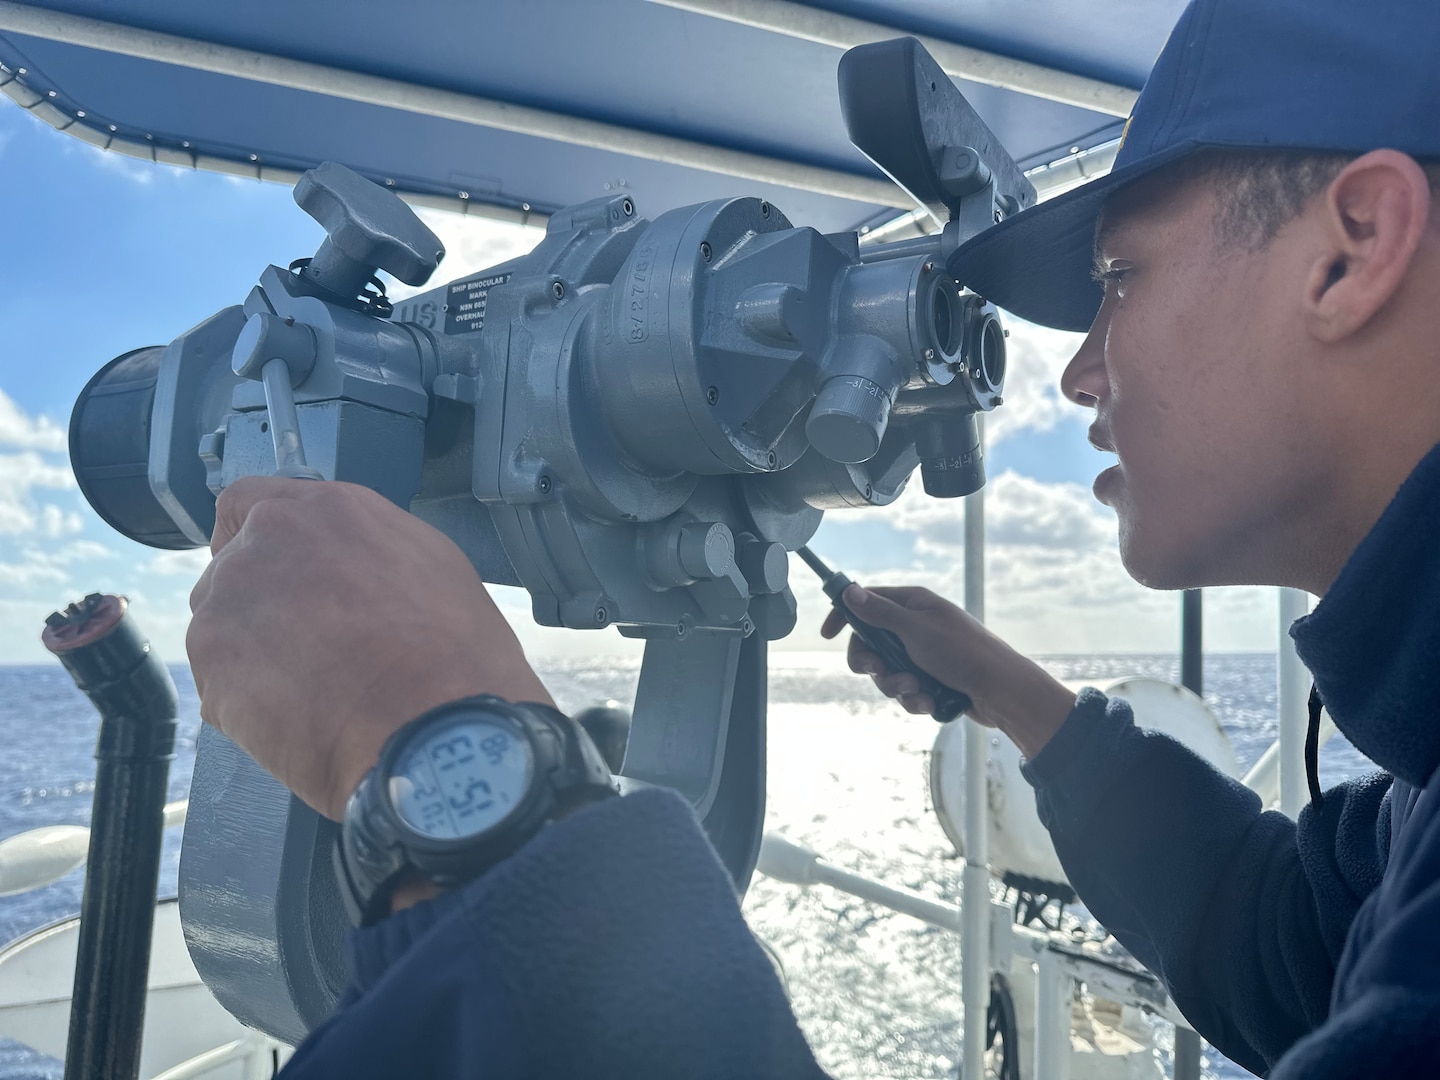 U.S. Coast Guard Seaman Apprentice Greyson Collins, a crew member assigned to USCGC Vigilant (WMEC 617), searches for migrant vessels or vessels in distress throughout the Florida Straits Feb. 7, 2023. Vigilant is on a patrol in support of Operation Vigilant Sentry in the Caribbean Sea. (U.S. Coast Guard photo by Ensign Serheni’te Johnson)